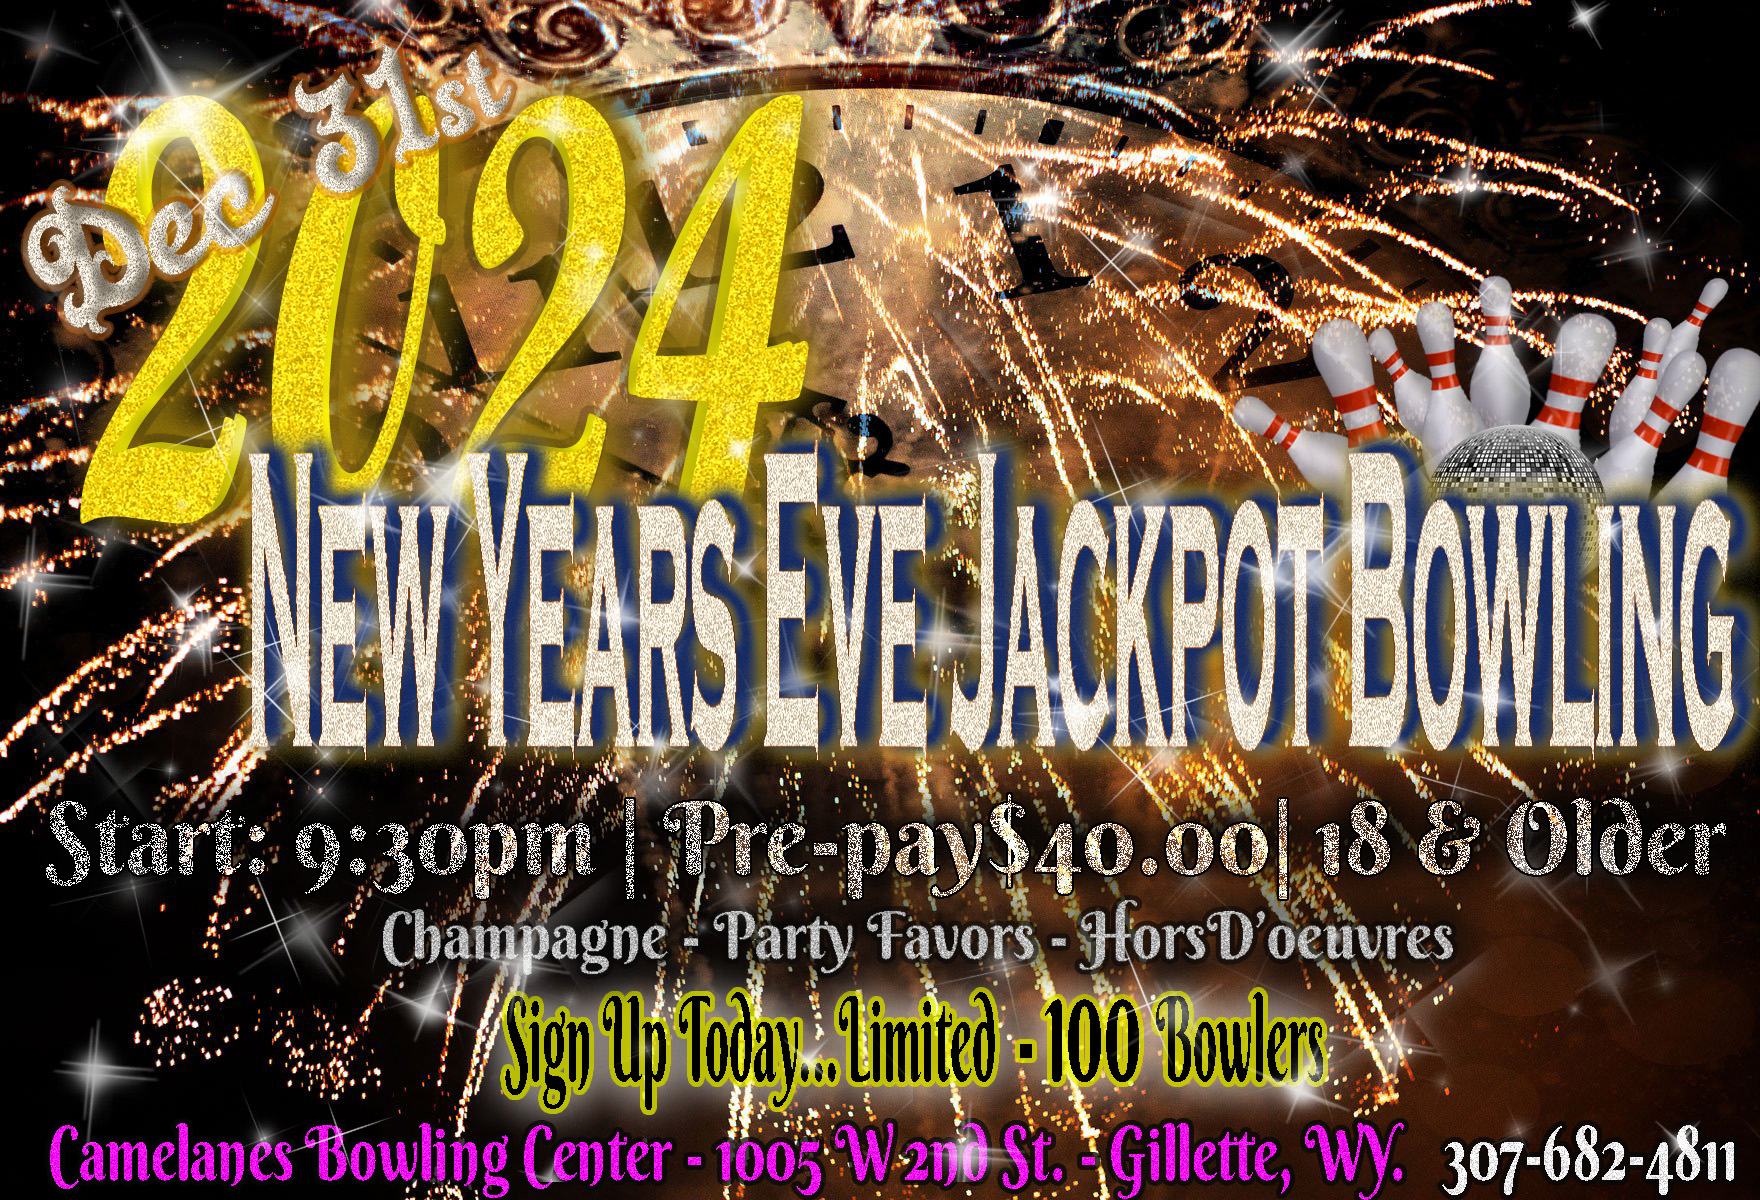 Camelanes Bowling Center New Years Eve Jackpot Bowling